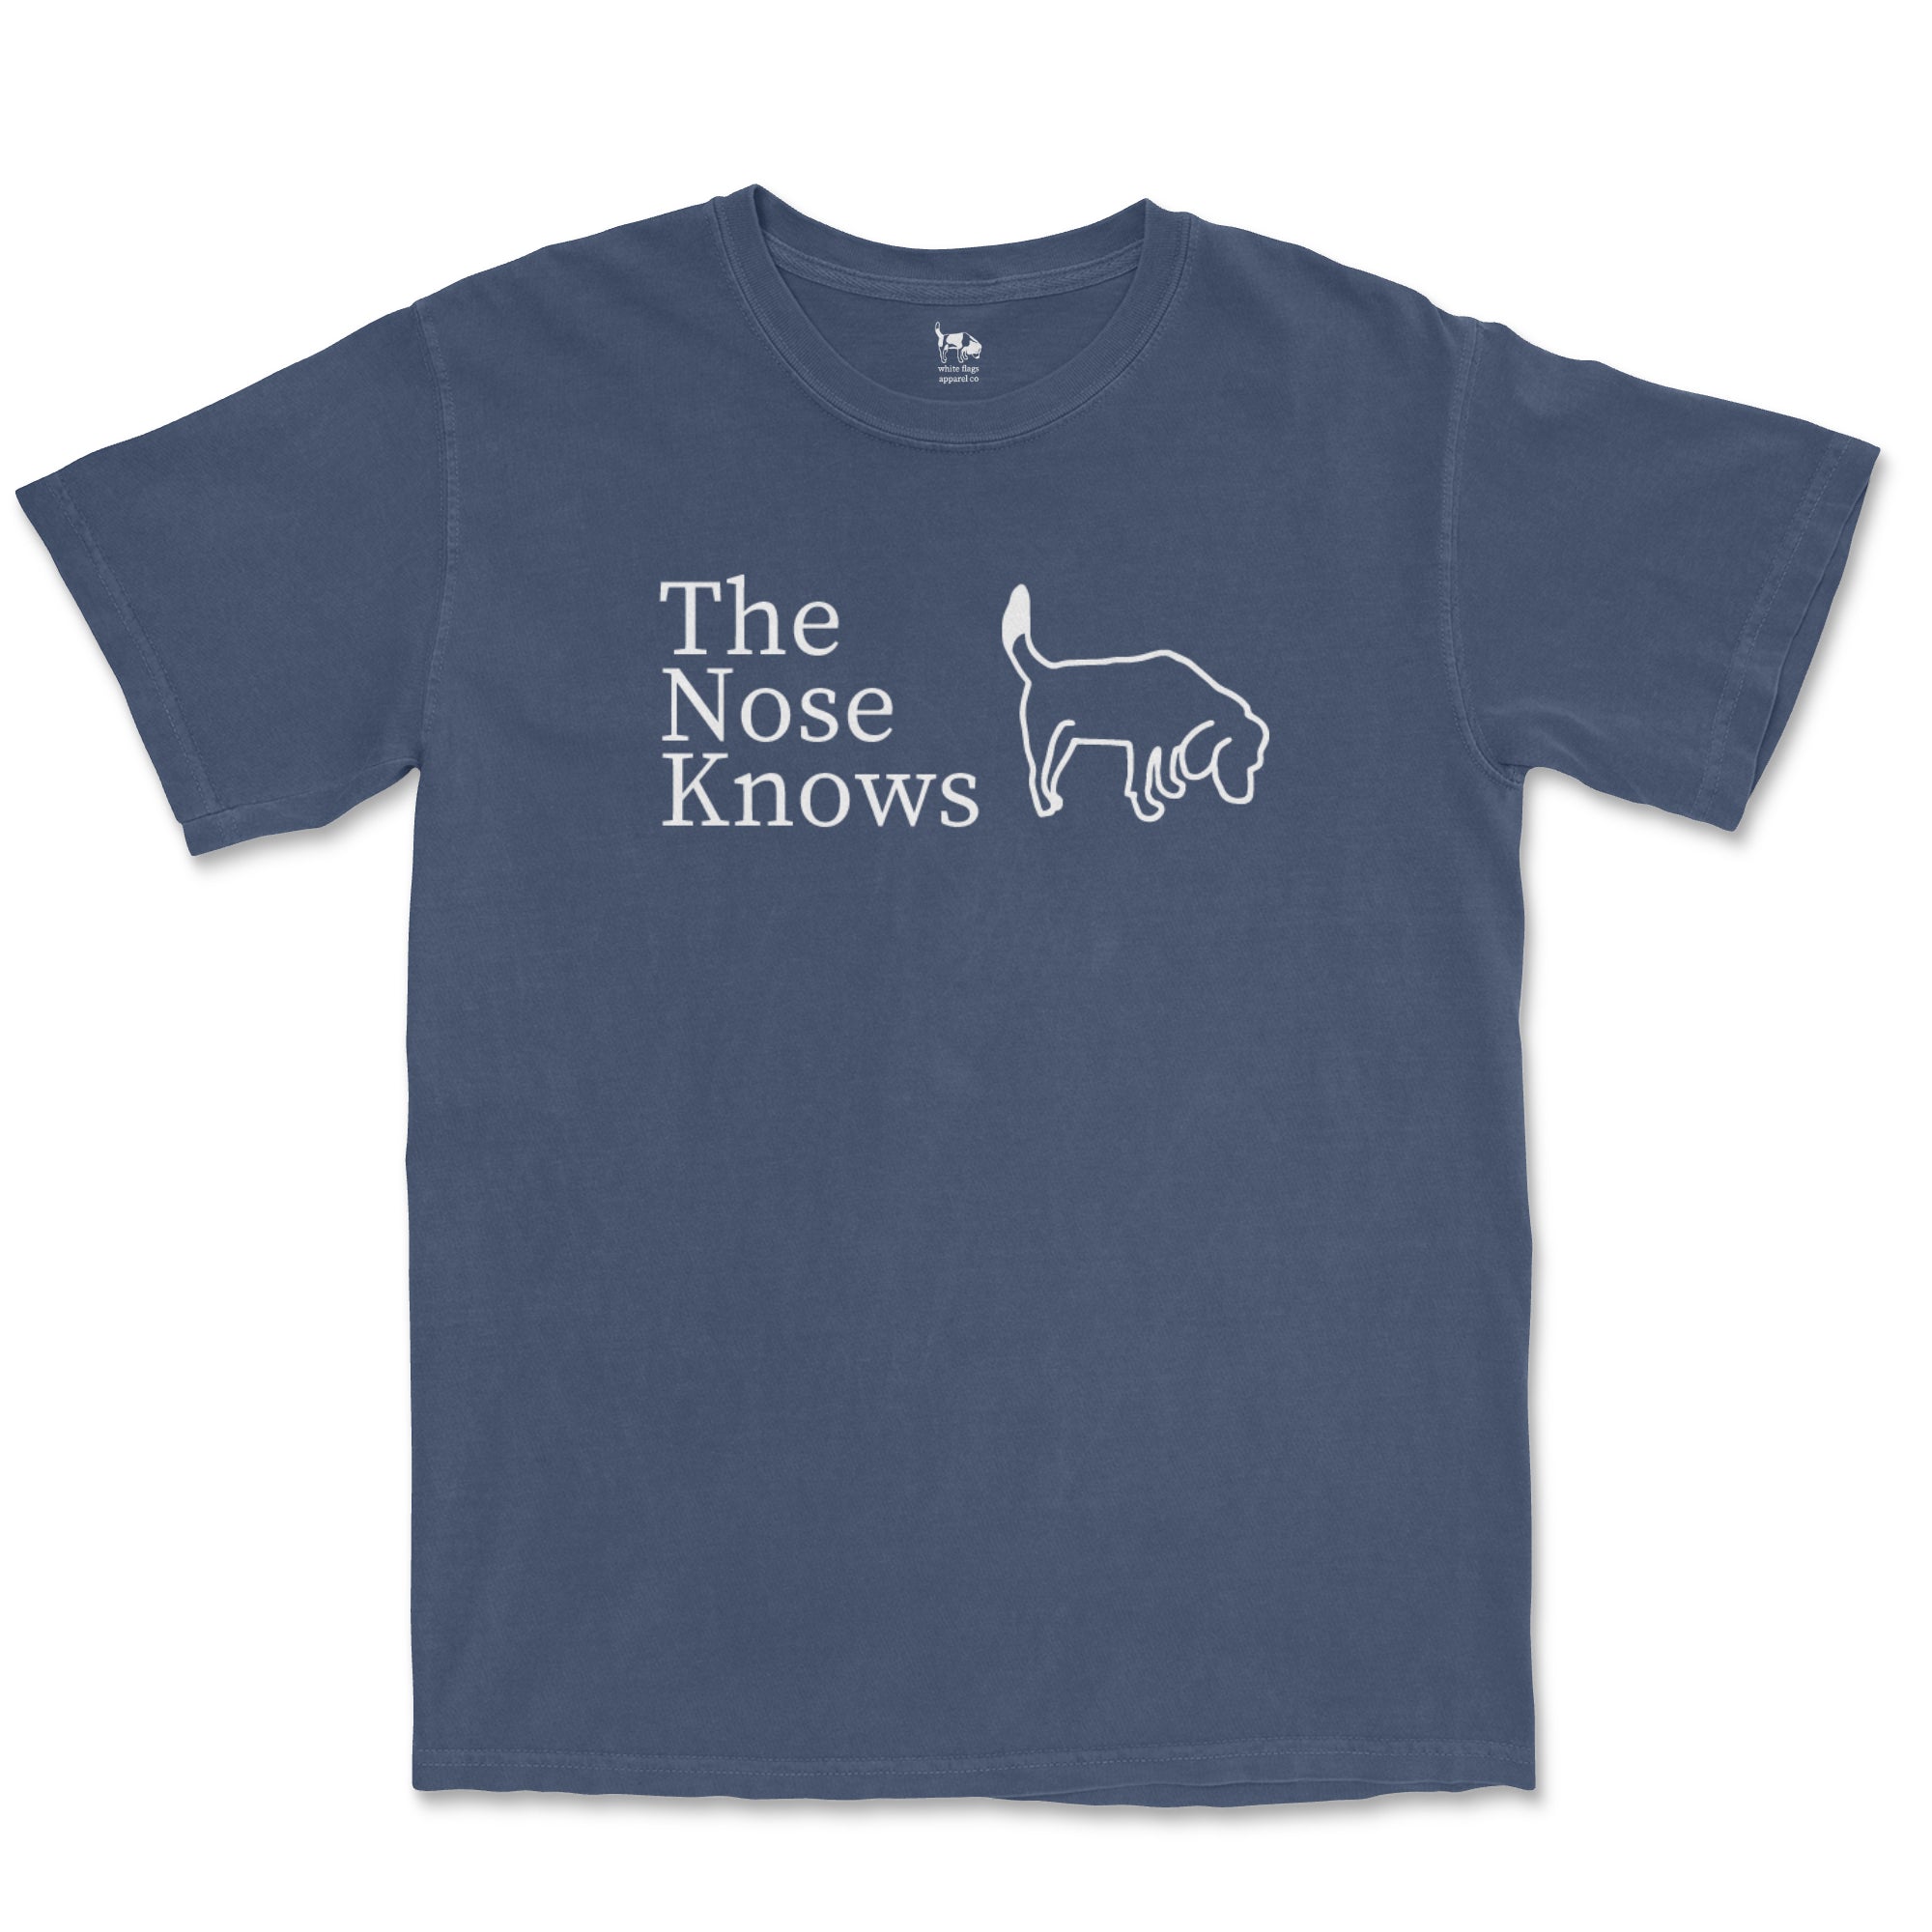 Rescue Tee - The Nose Knows - Short Sleeve